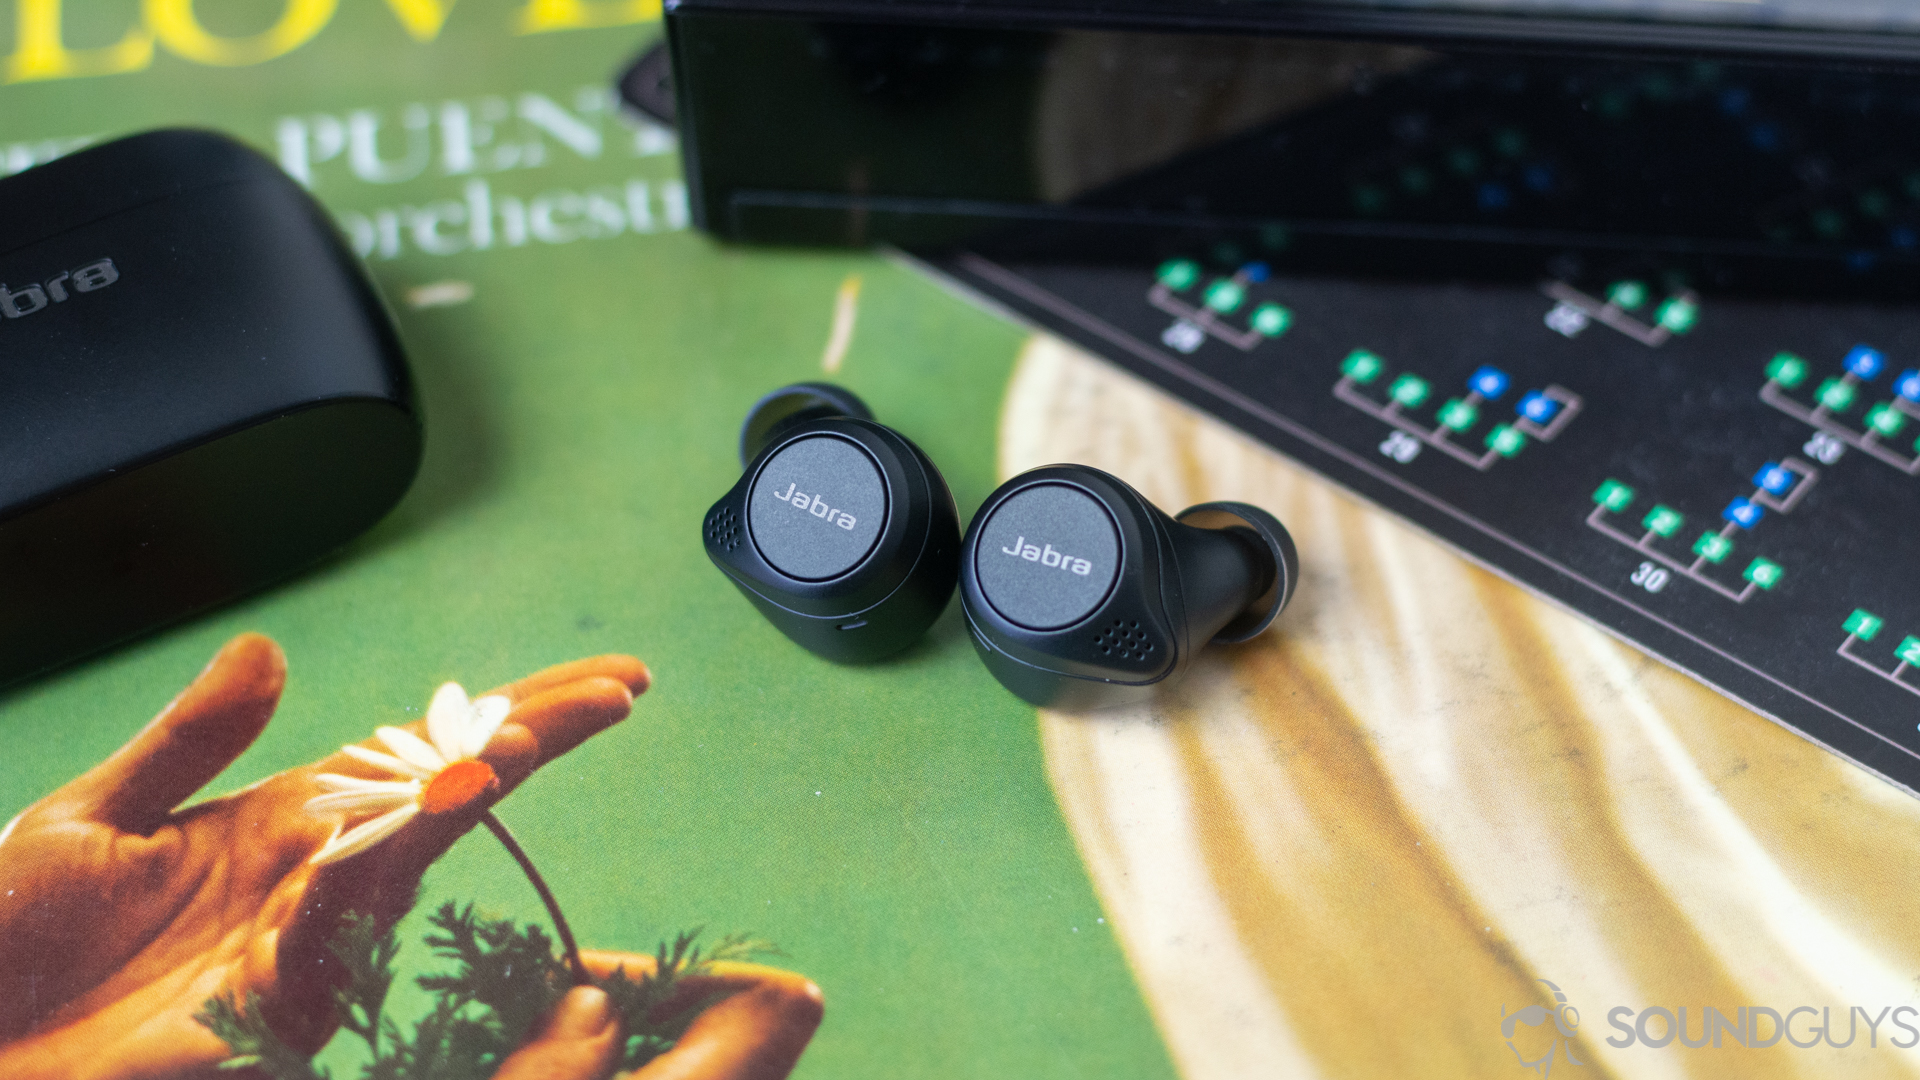 Close-up shot of the Jabra Elite 75t earbuds playback buttons on an old record